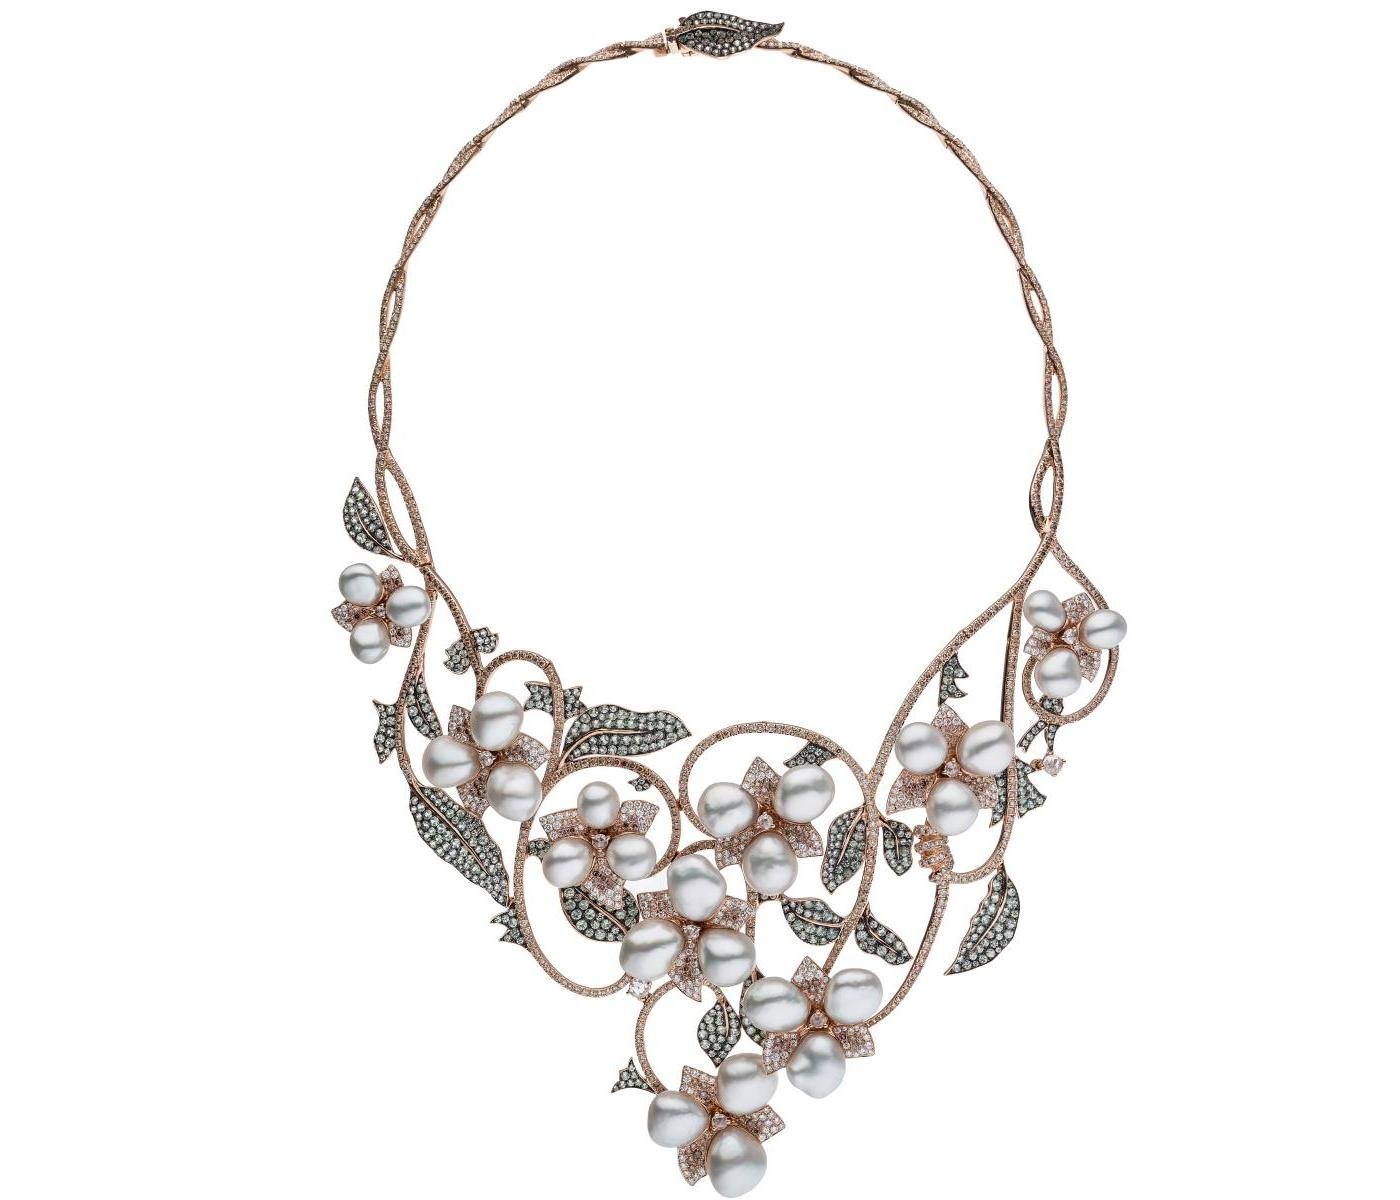 Necklace by Autore